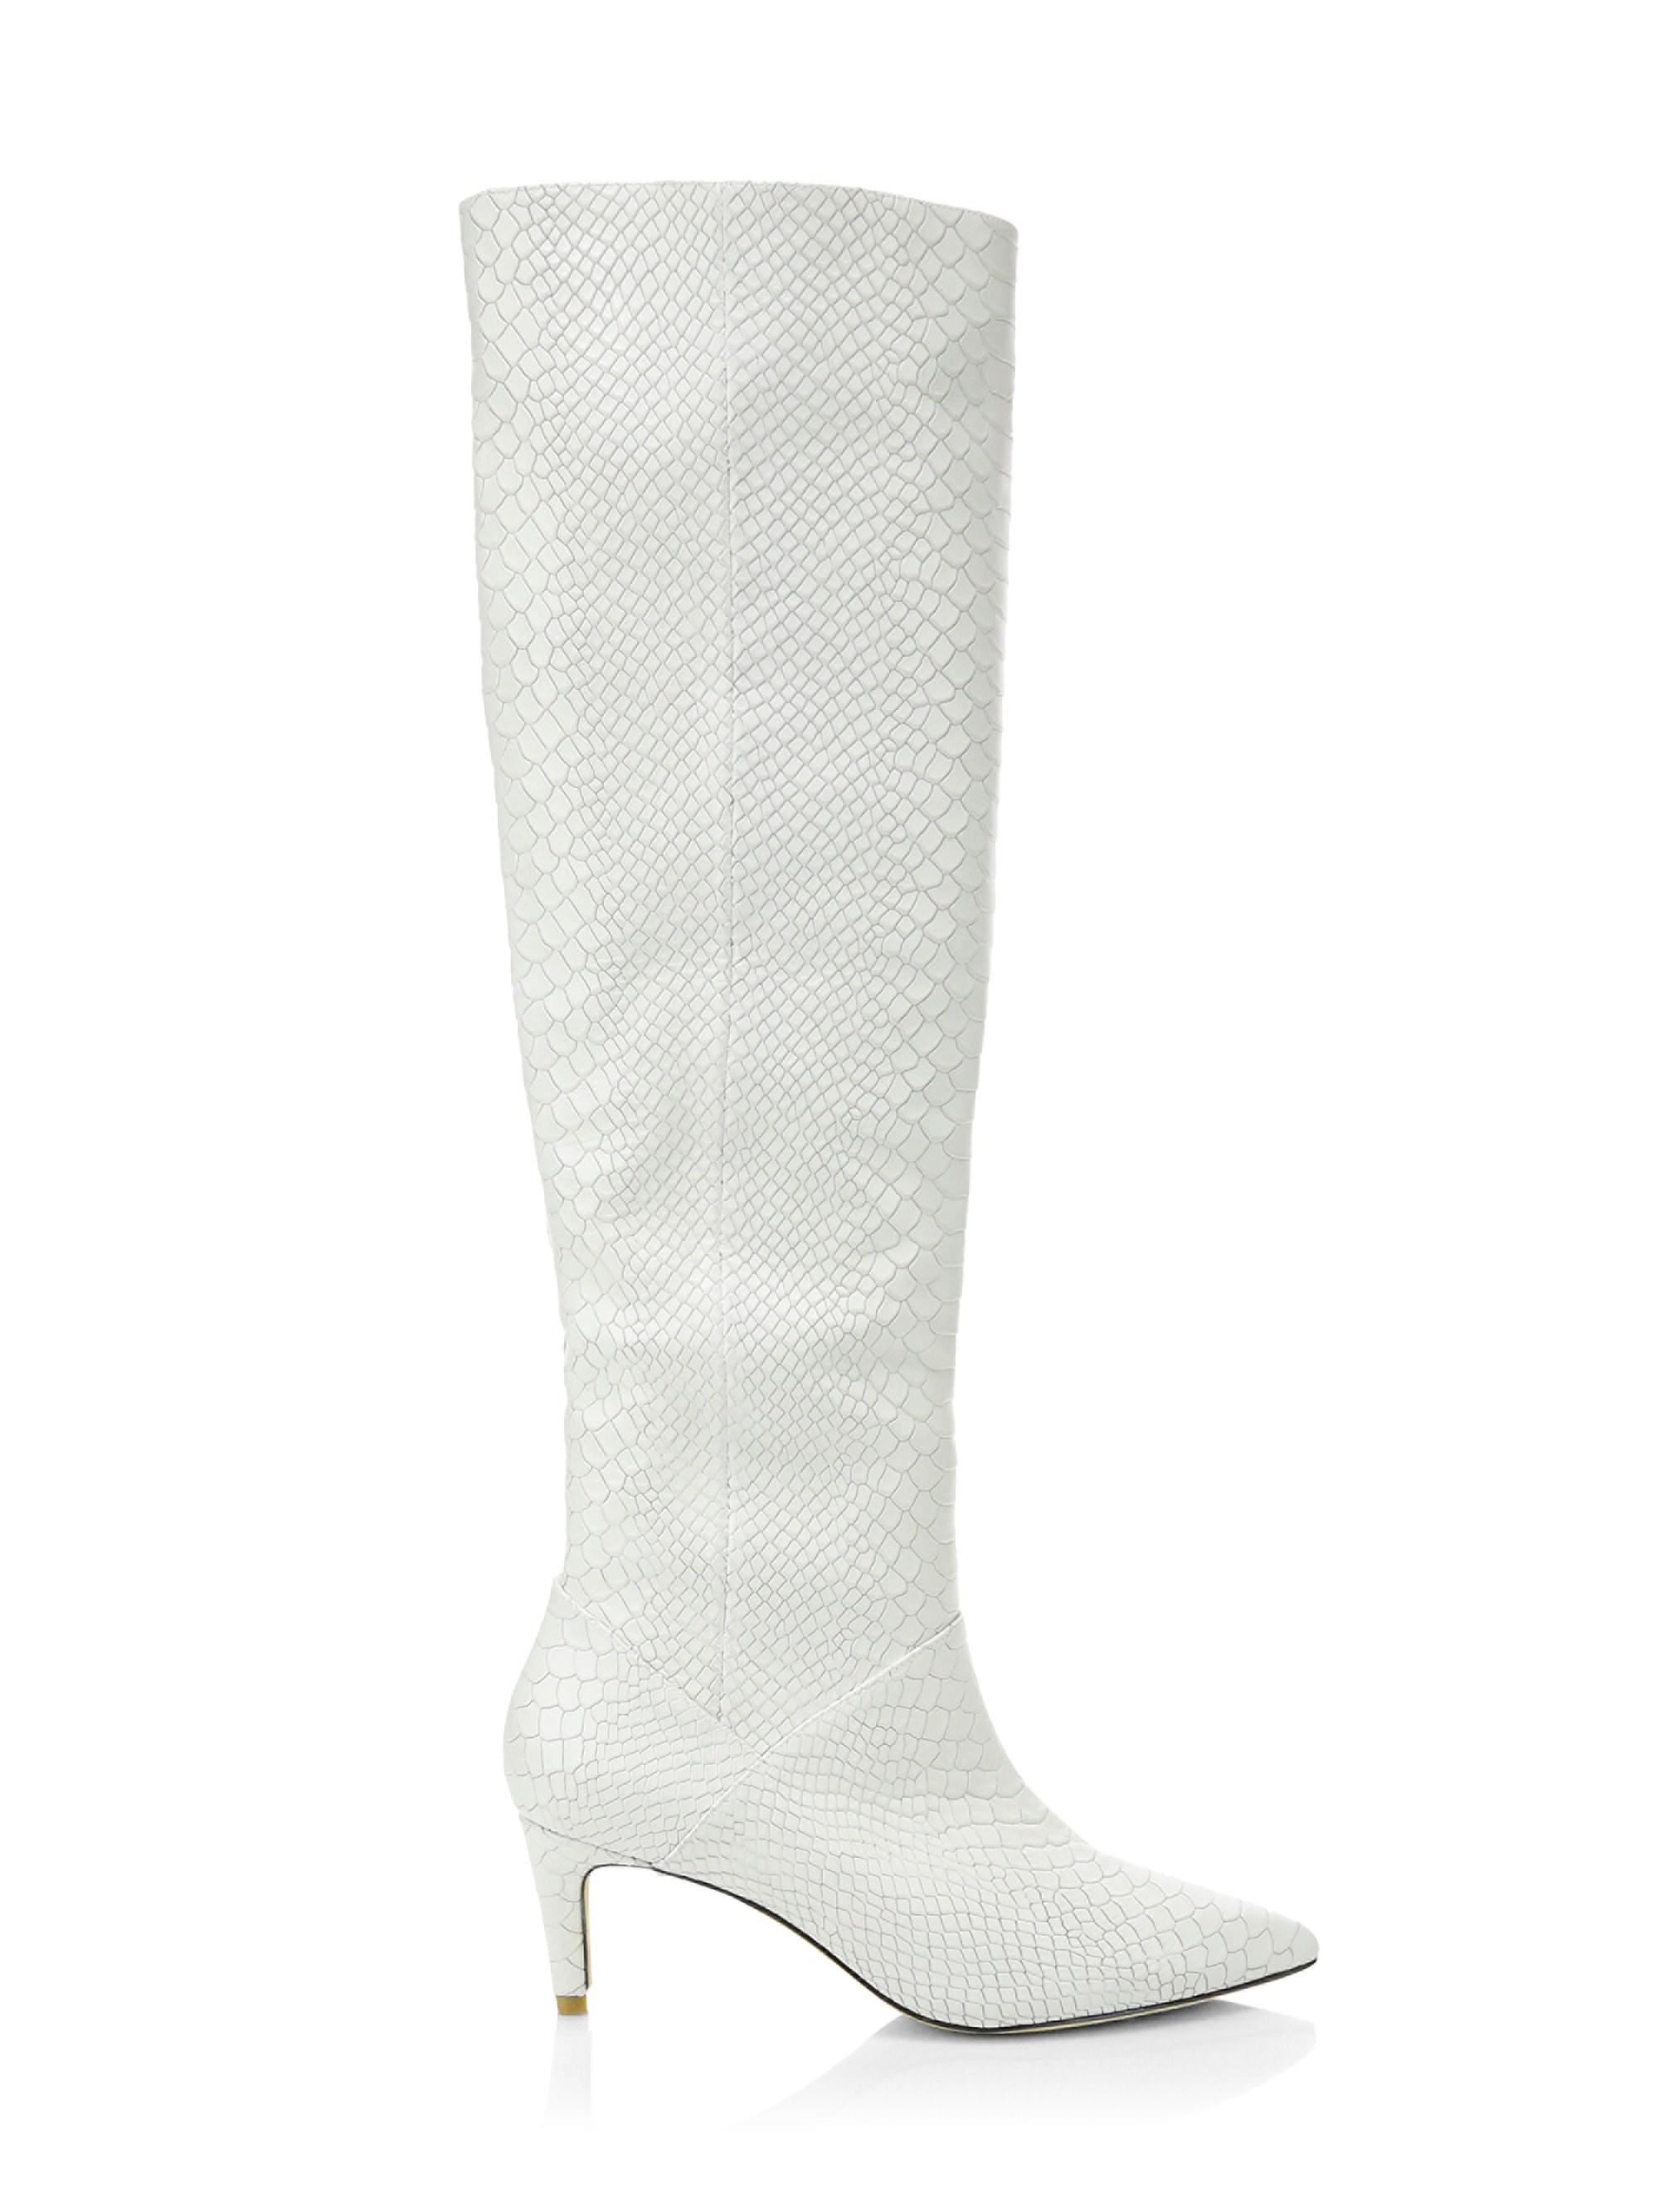 joie white boots